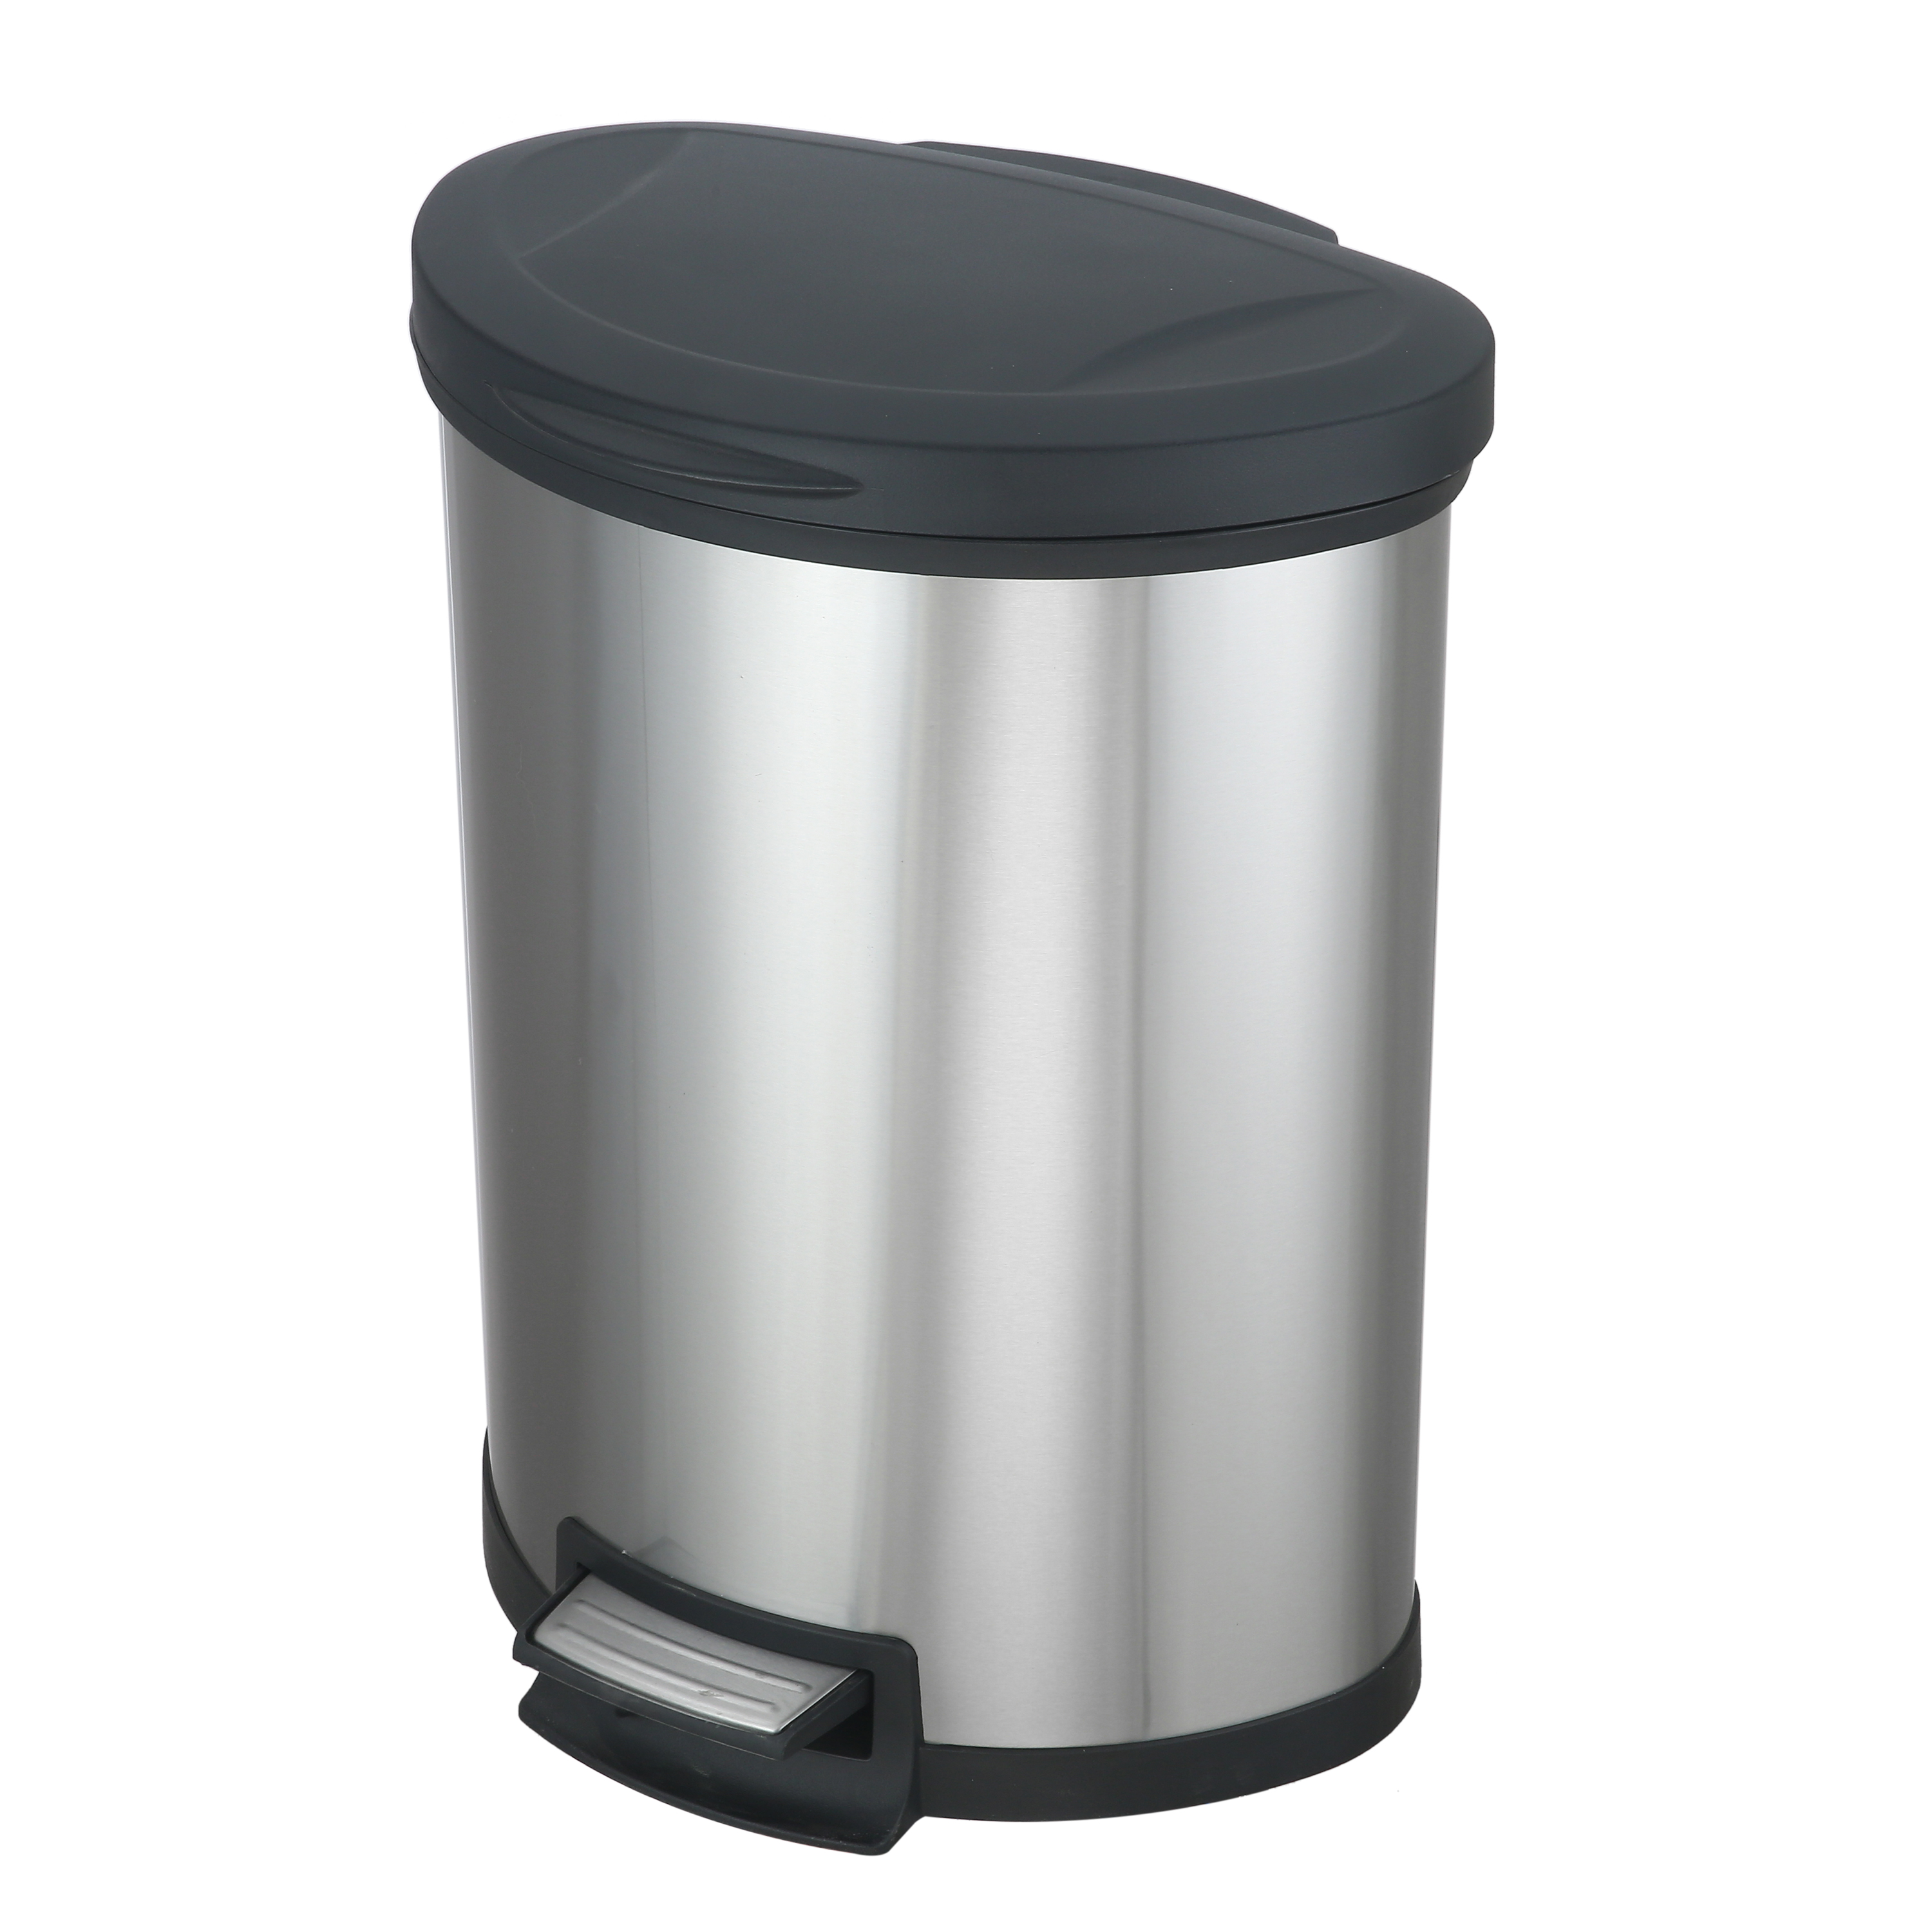 Mainstays 14.2 gal/54 Liter Stainless Steel Semi Round Kitchen Garbage Can with Lid - image 1 of 5